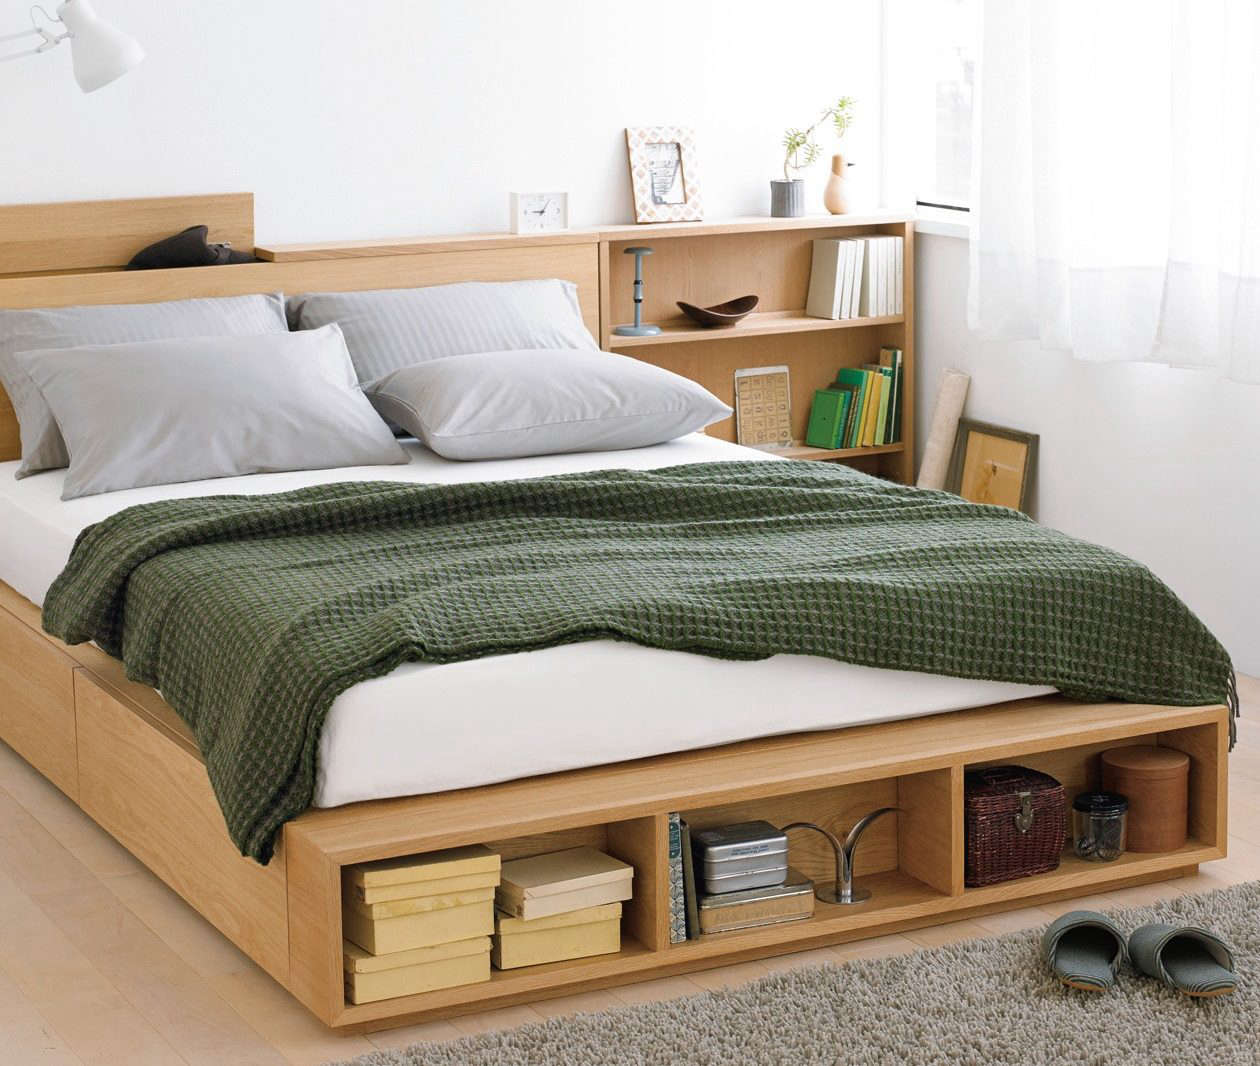 10 Easy Pieces Storage Beds Remodelista, Muji Wooden Bed Frame